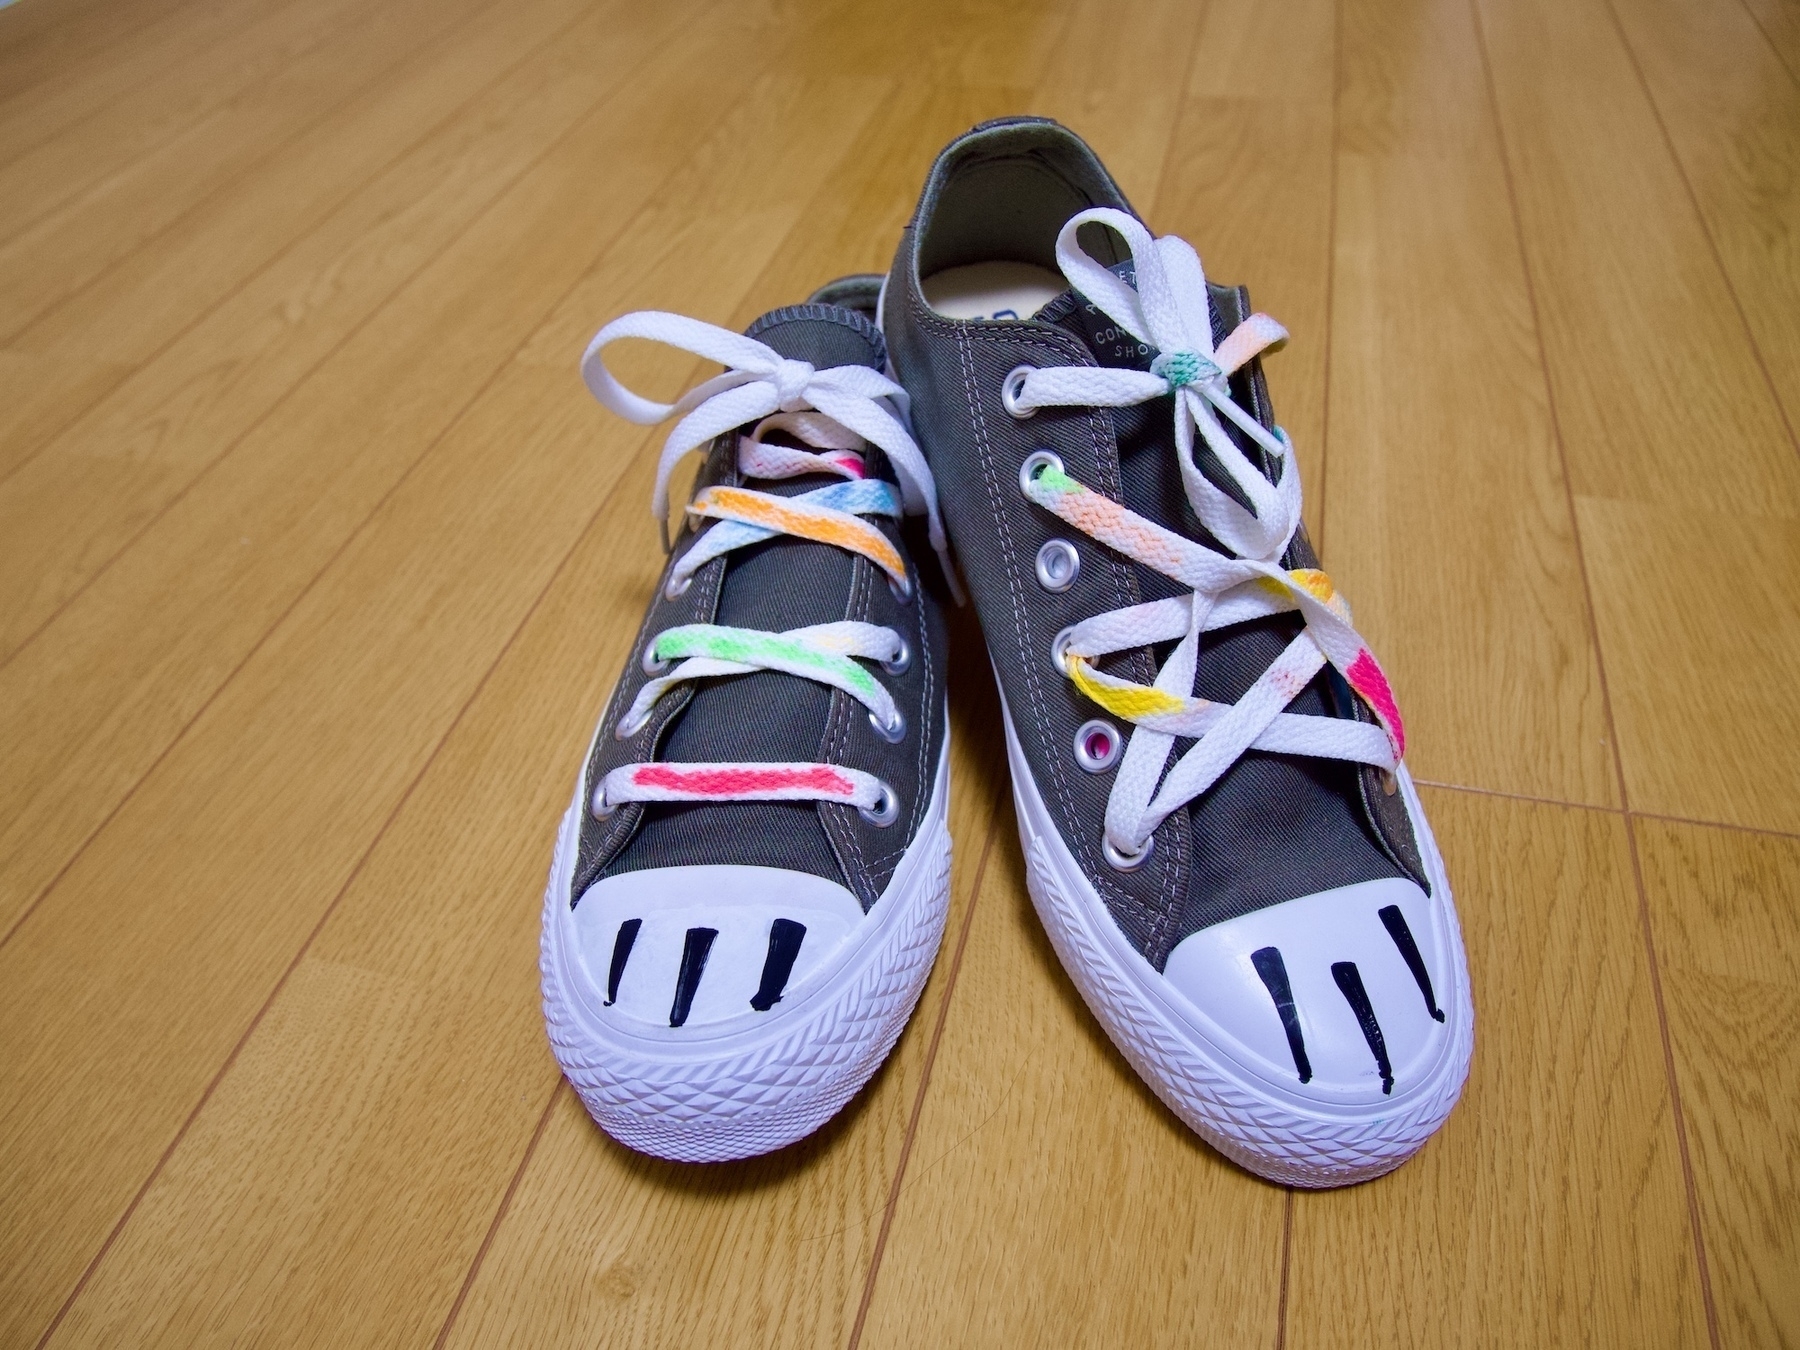 A pair of brand new converse with hand coloured multicolour laces tied in unorthodox style, and marker lines on the toecaps to make them look like animal feet